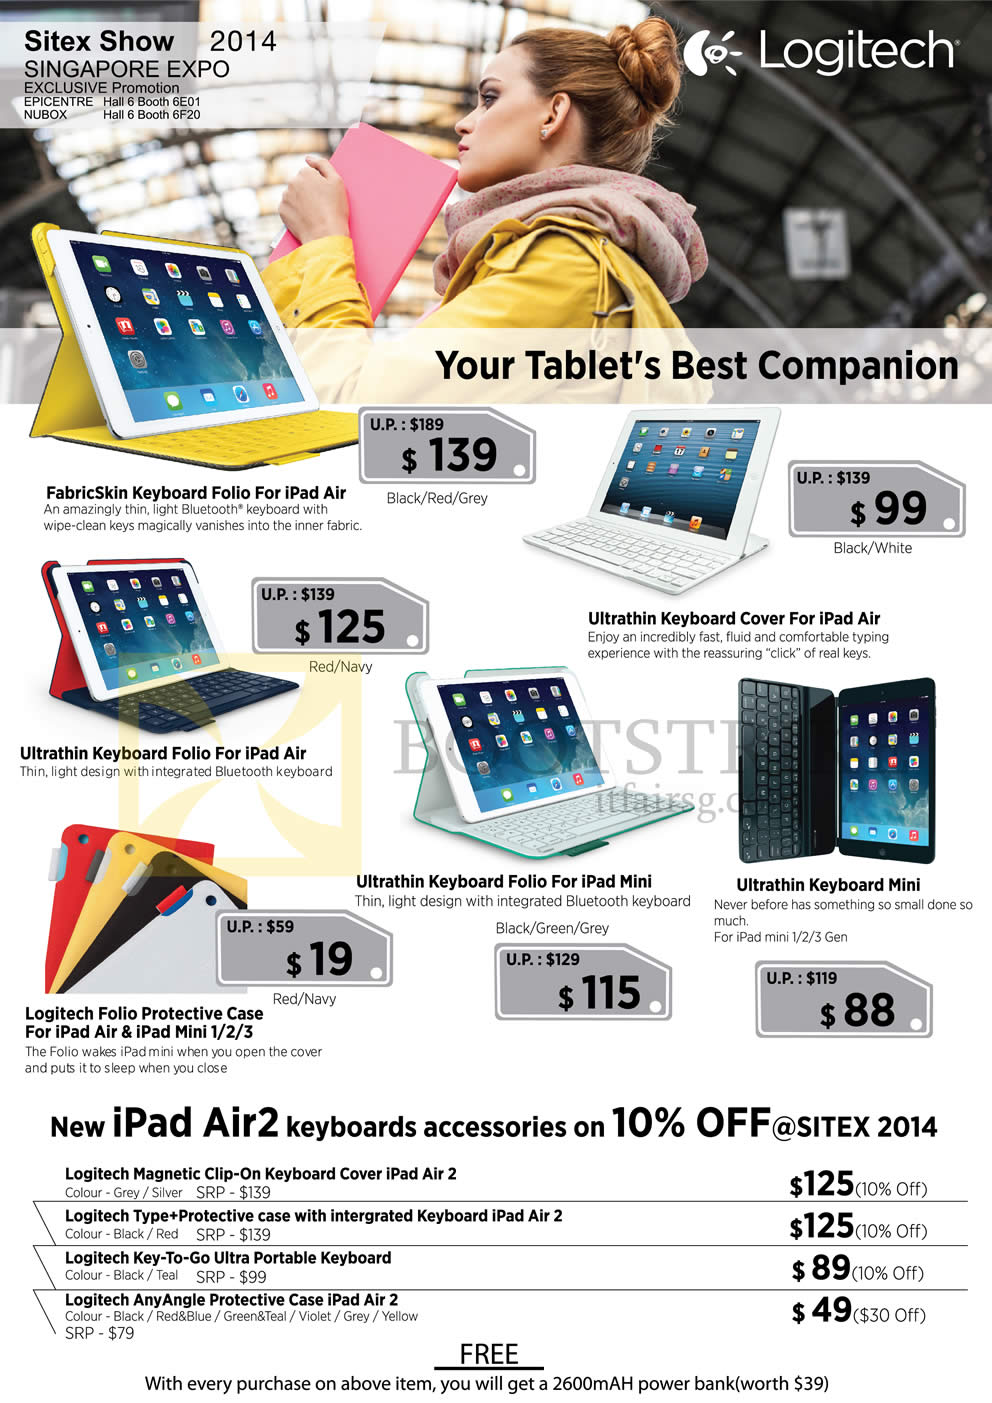 SITEX 2014 price list image brochure of Logitech Accessories Folio IPad Keyboard Covers, Folio Protective Case, Clip-On Keyboard Cover, Portable Keyboard